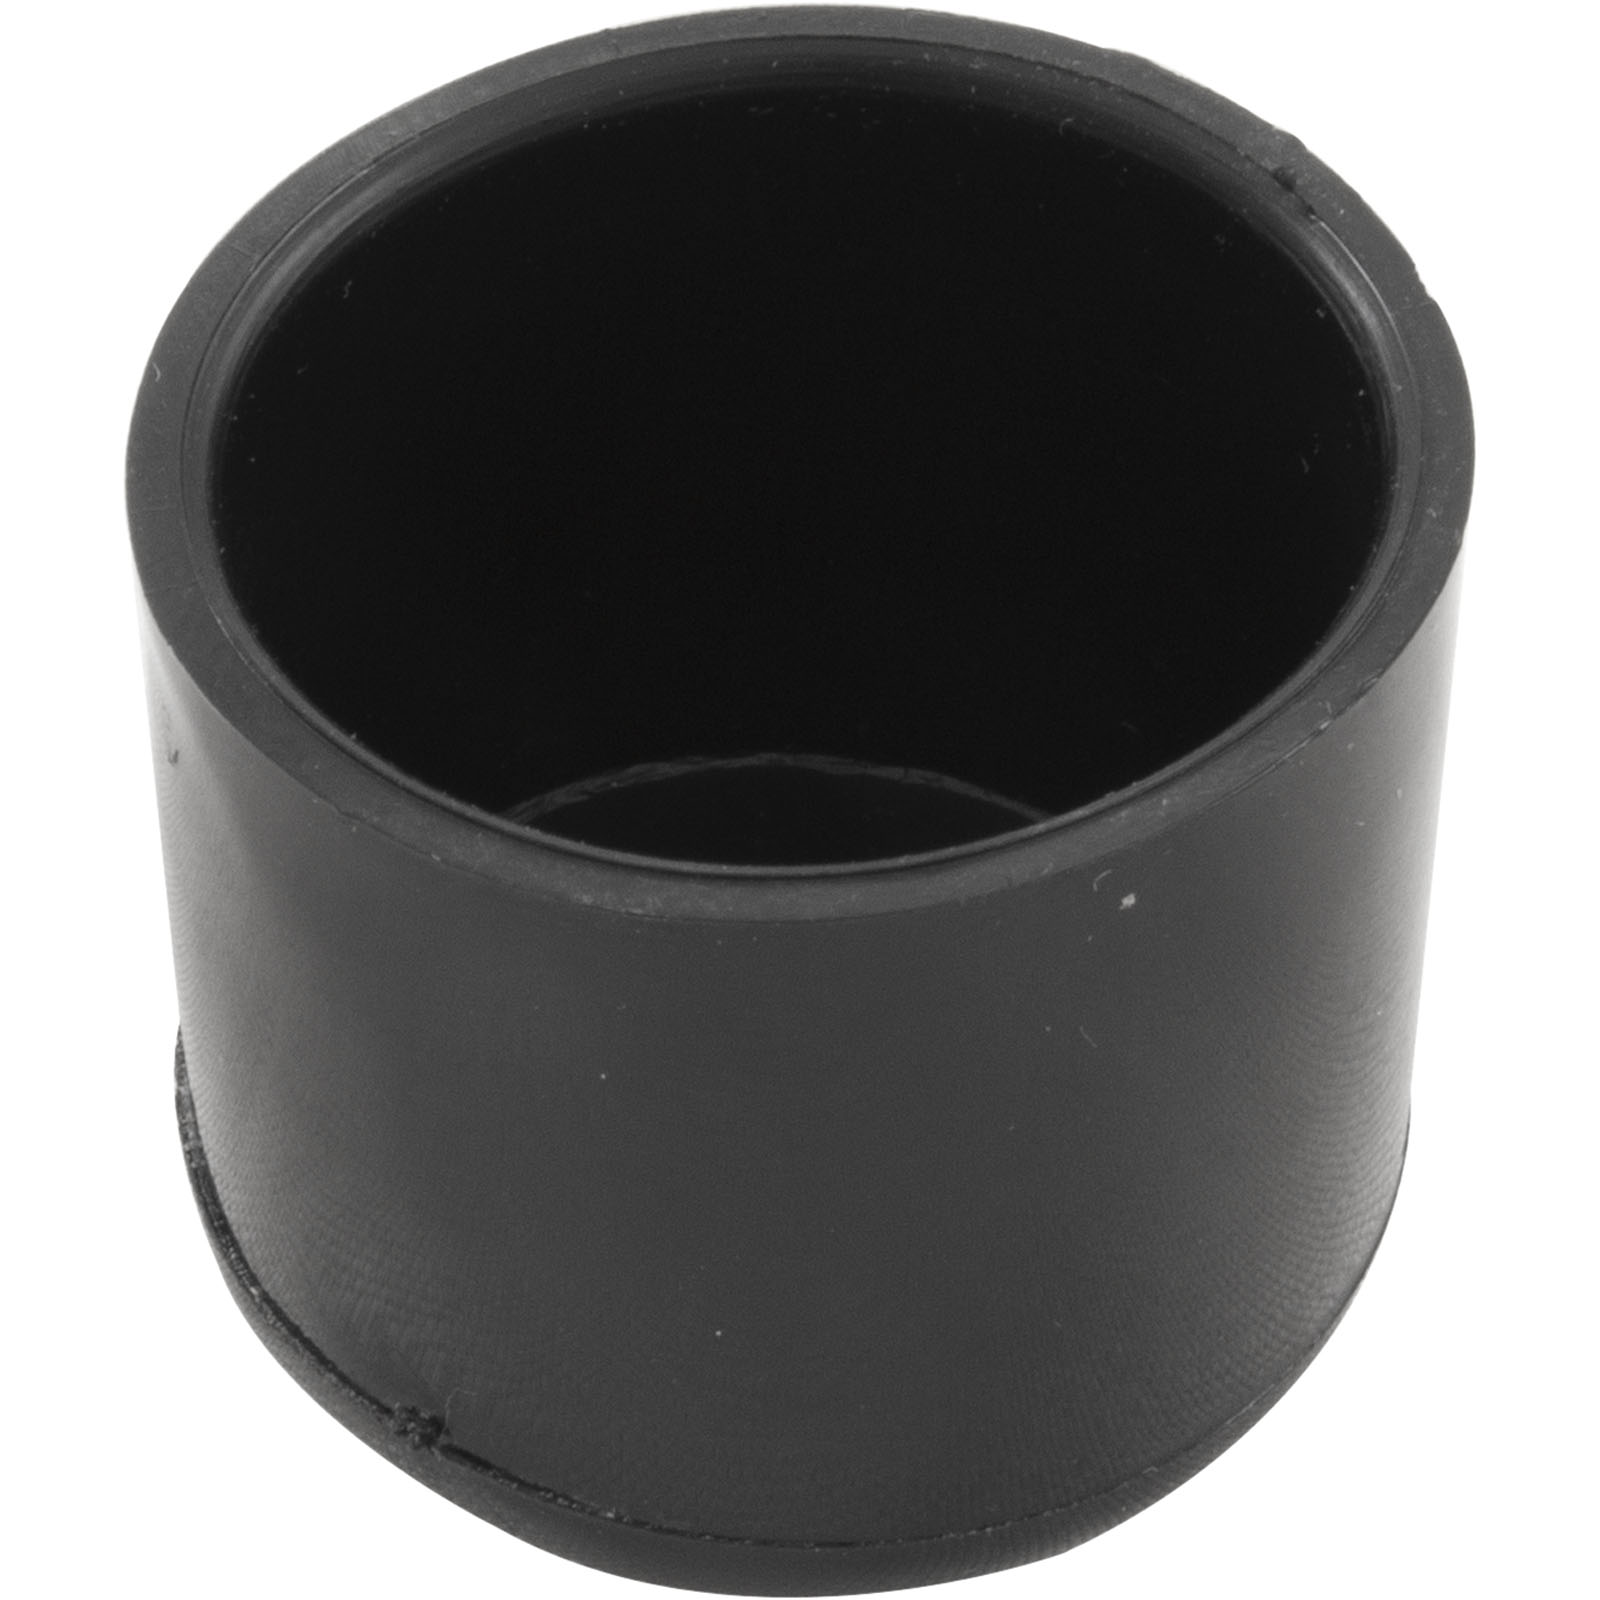 Picture of Fence Post Cap, GLI Pool Products, Vinyl, Black